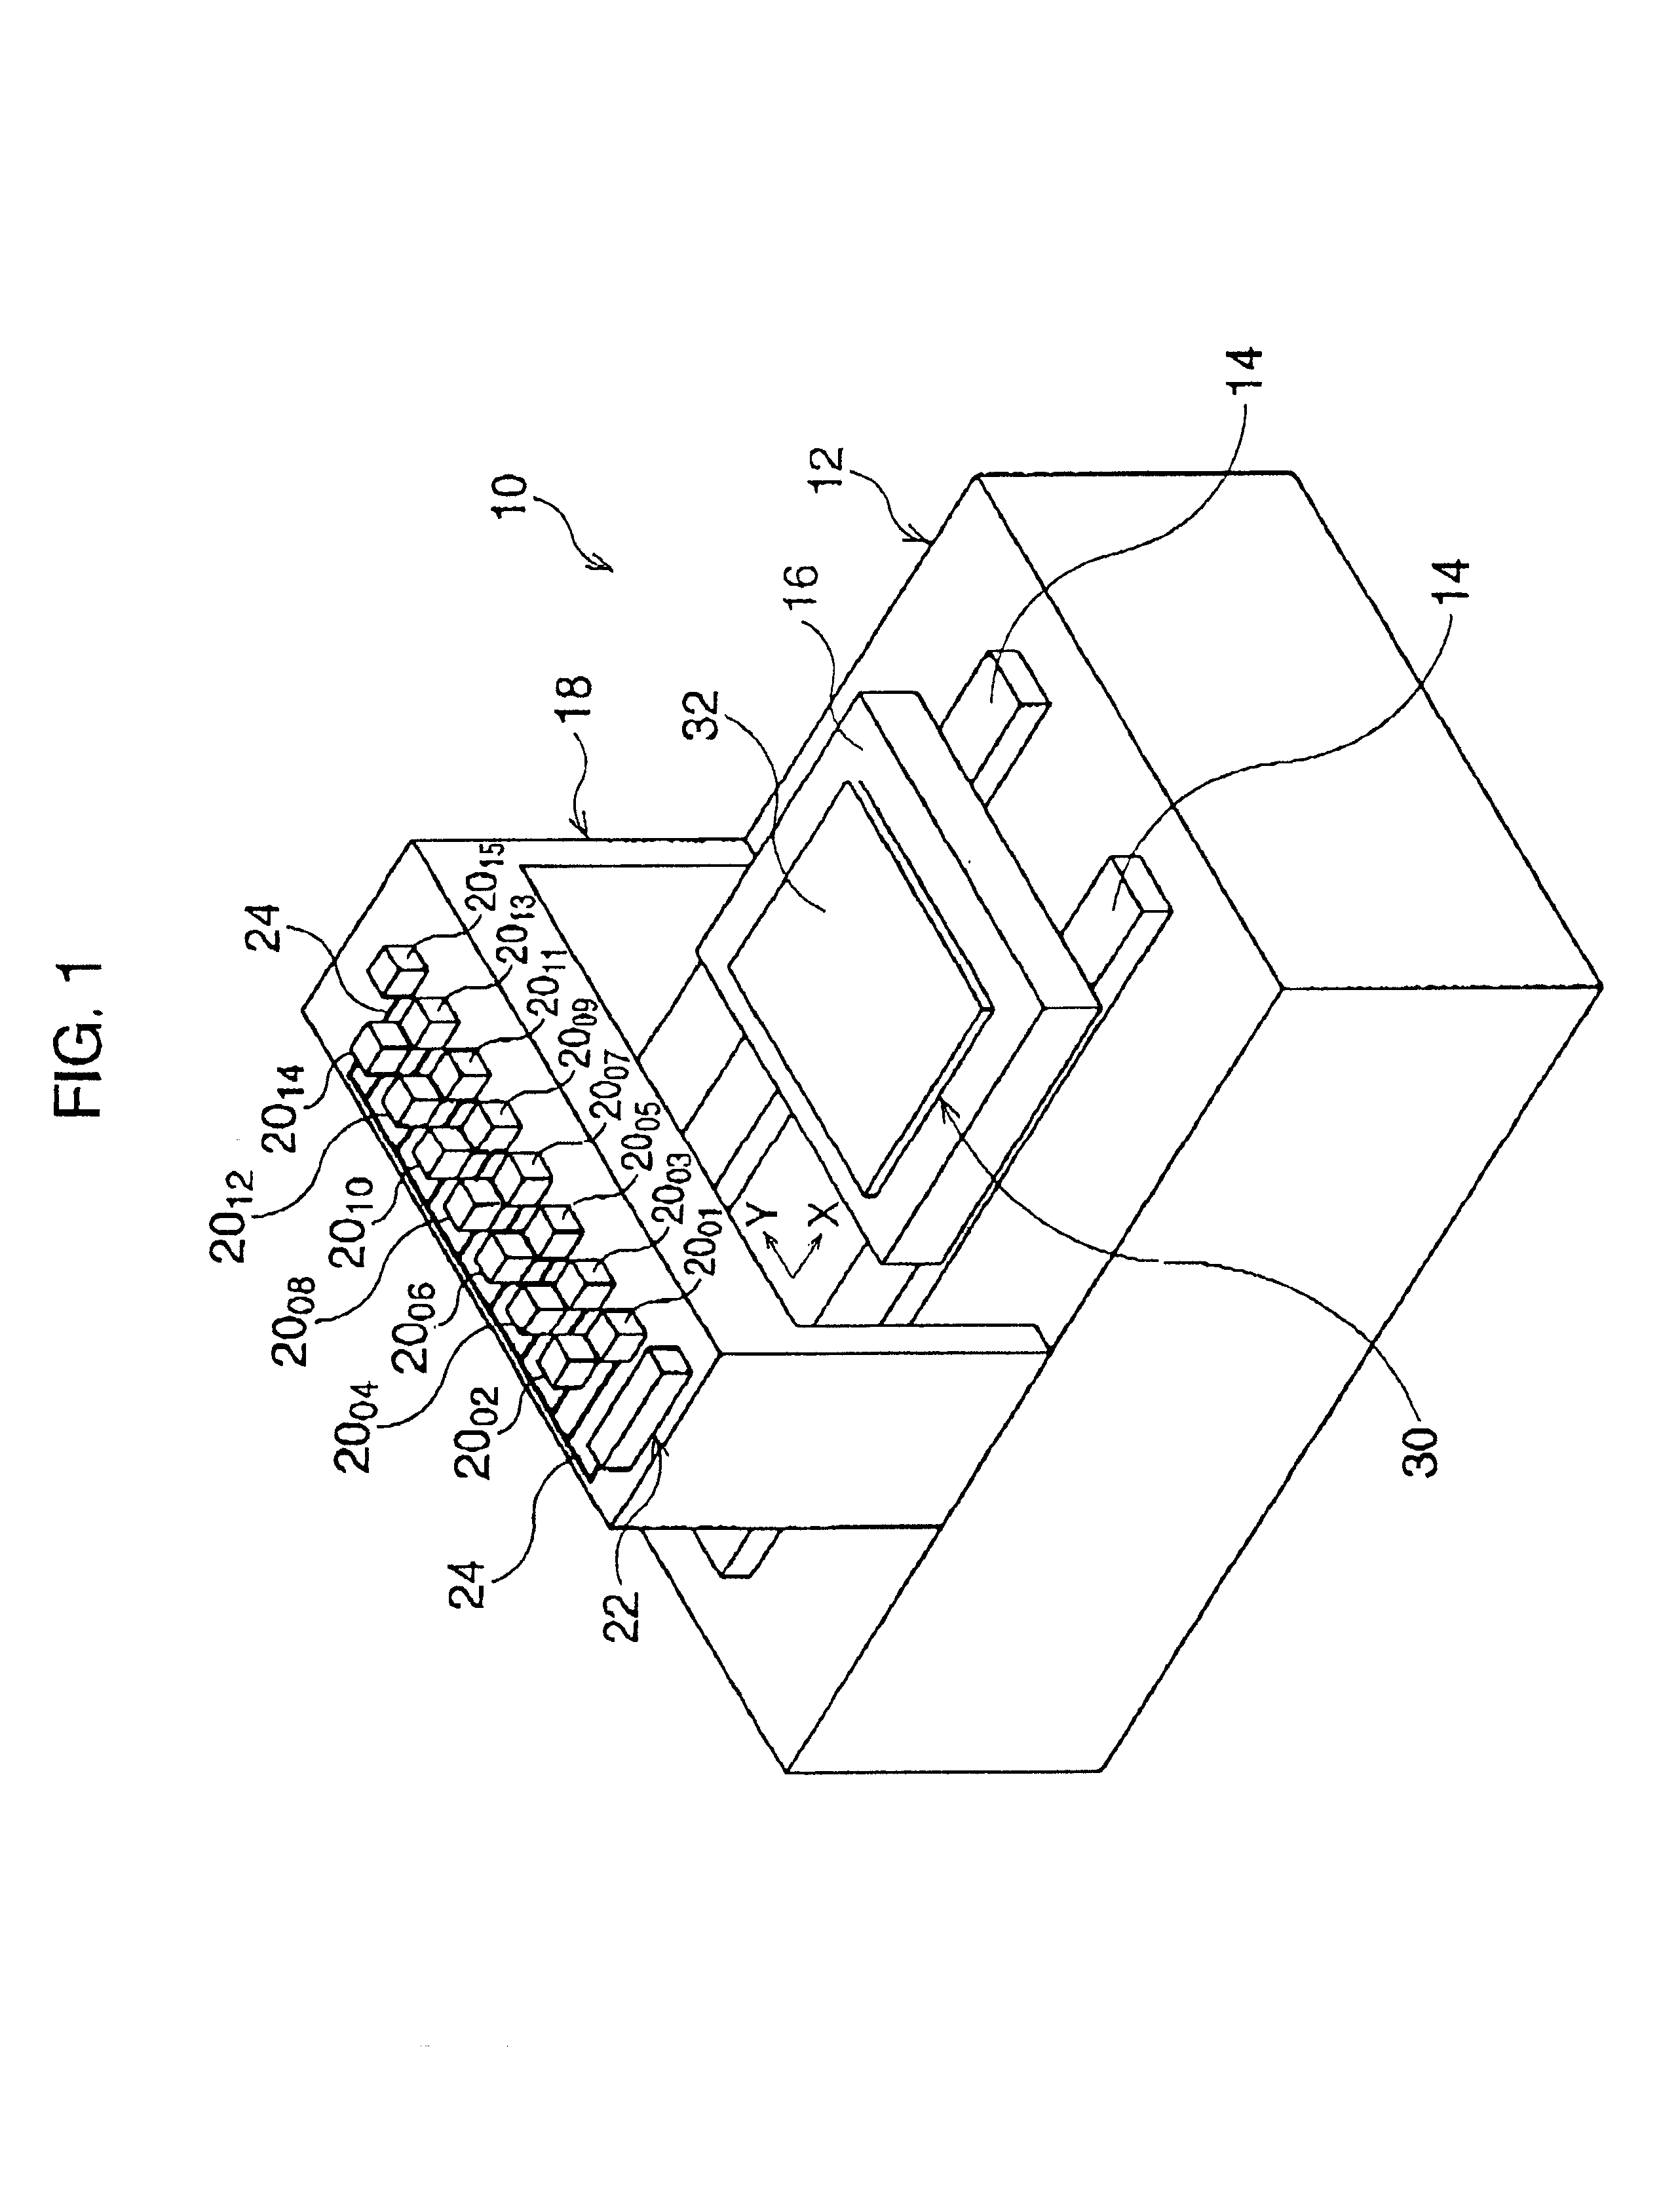 Multiple-exposure drawing apparatus and method thereof